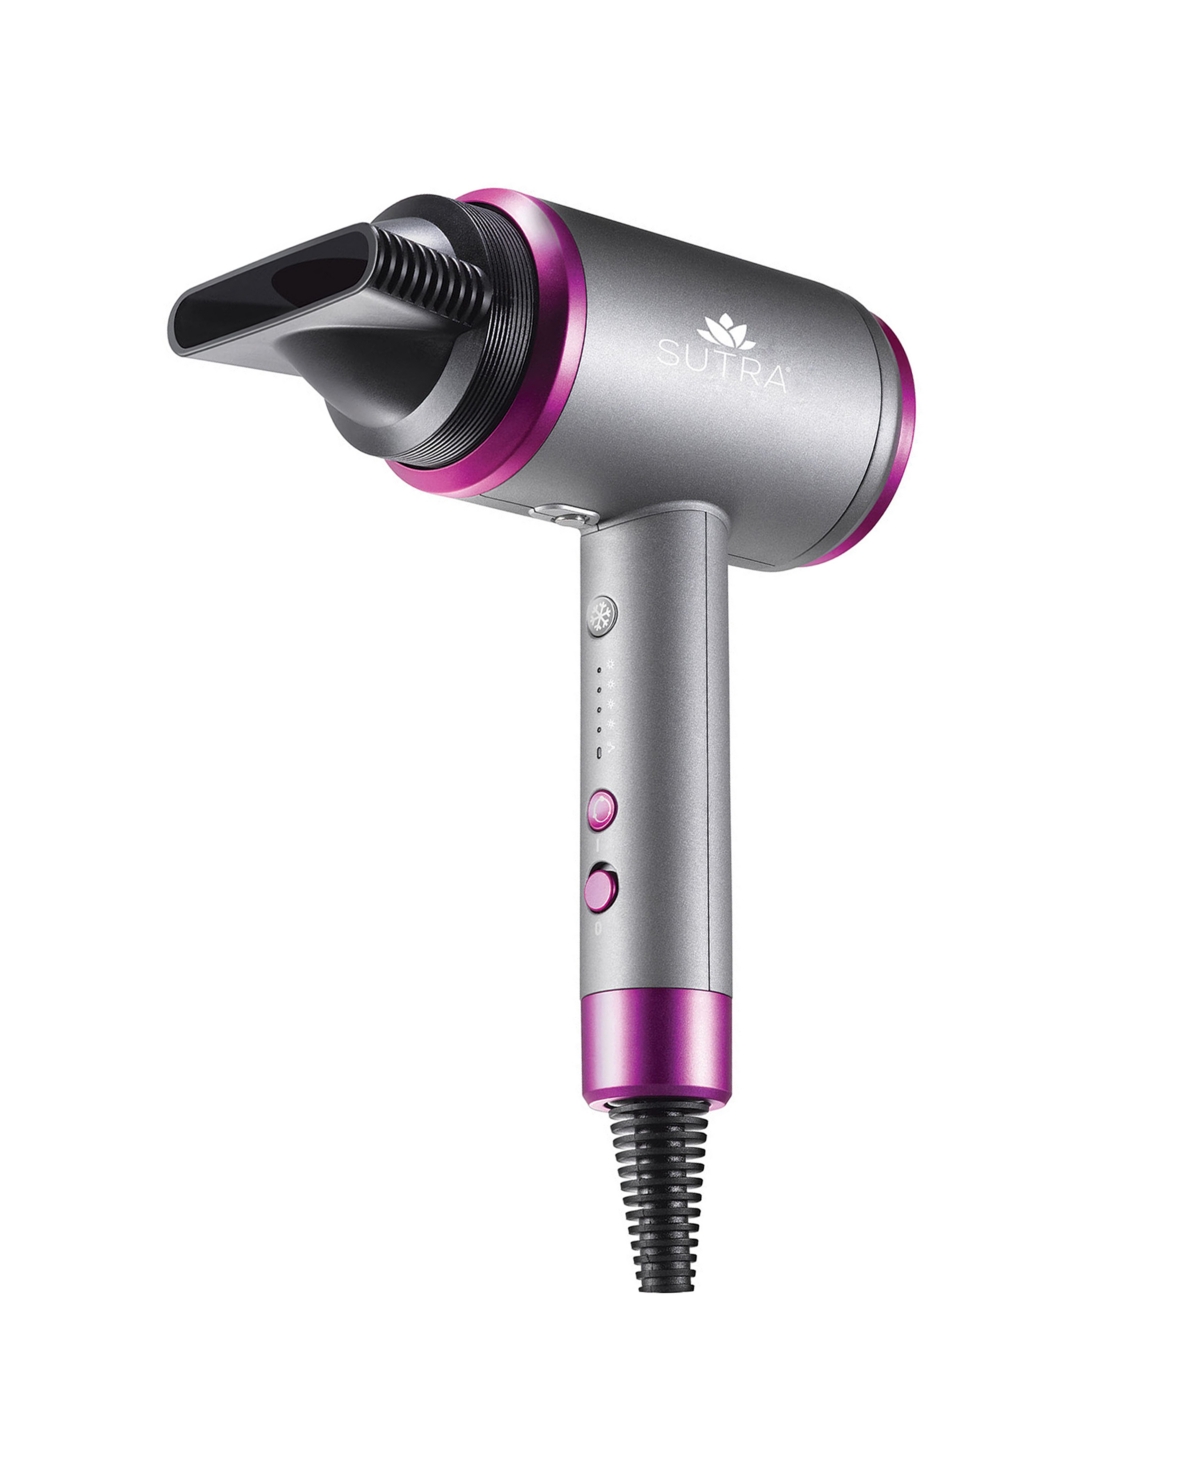 Accelerator 3500 Blow Dryer with 2 Speed & 3 Heat Settings - Grey Pink